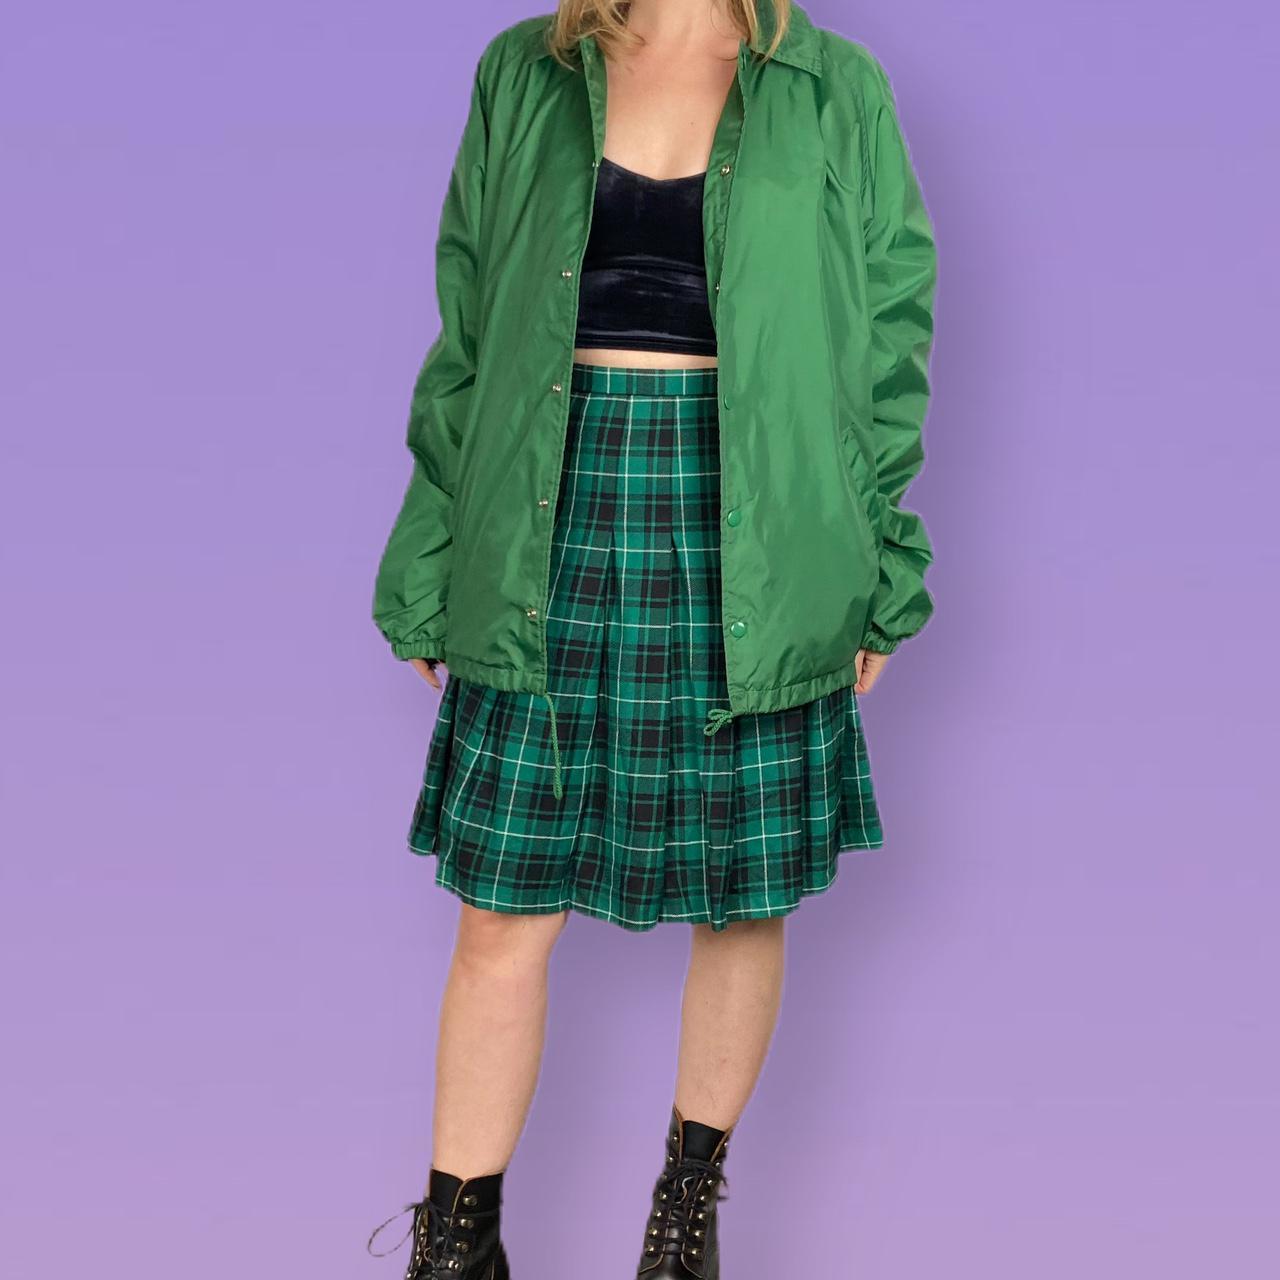 Product Image 4 - Green plaid skirt by Pendleton!